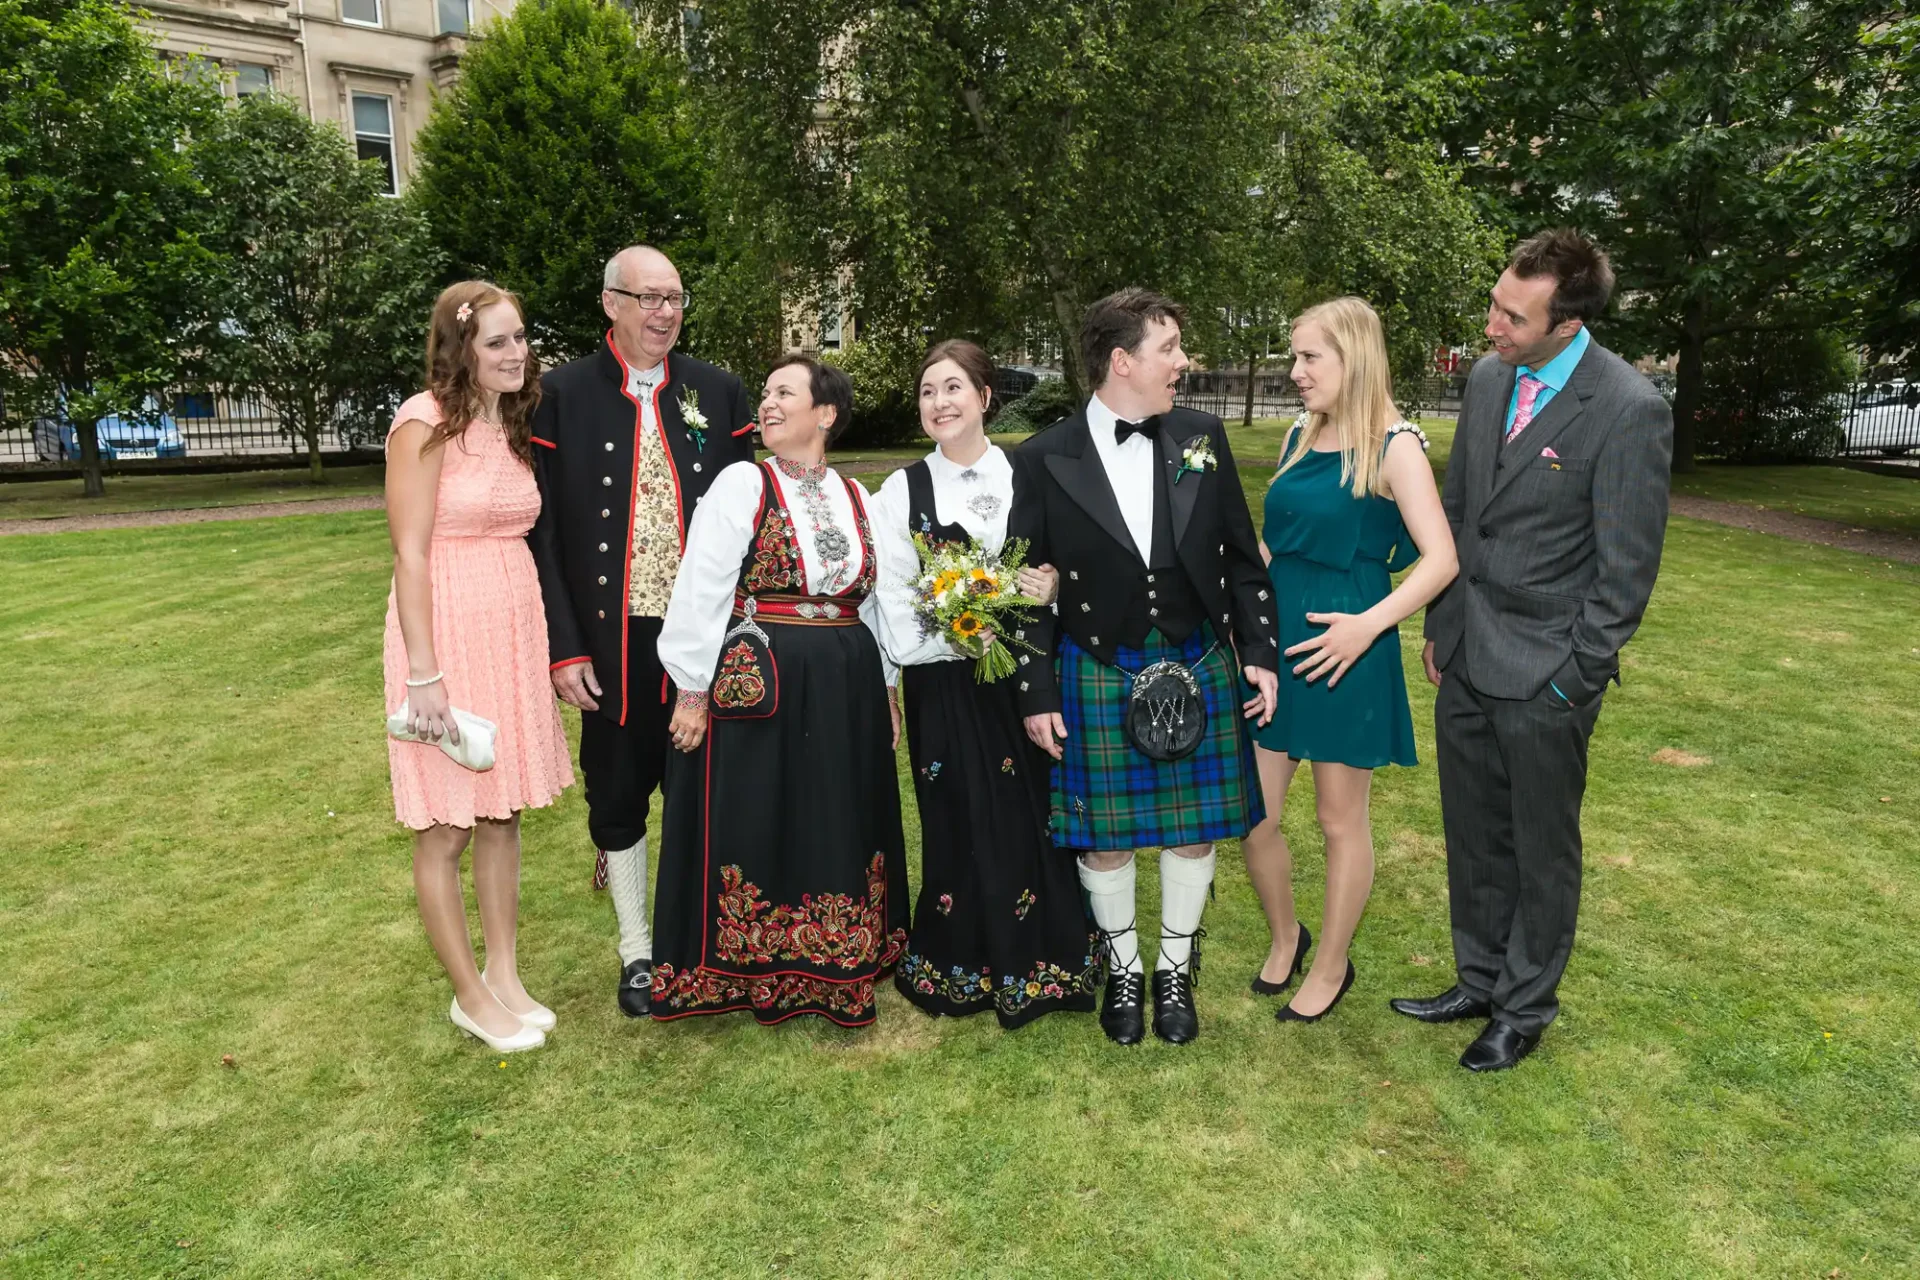 A group of seven people in formal attire, including kilts and a traditional norwegian dress, smiling together in a lush park.